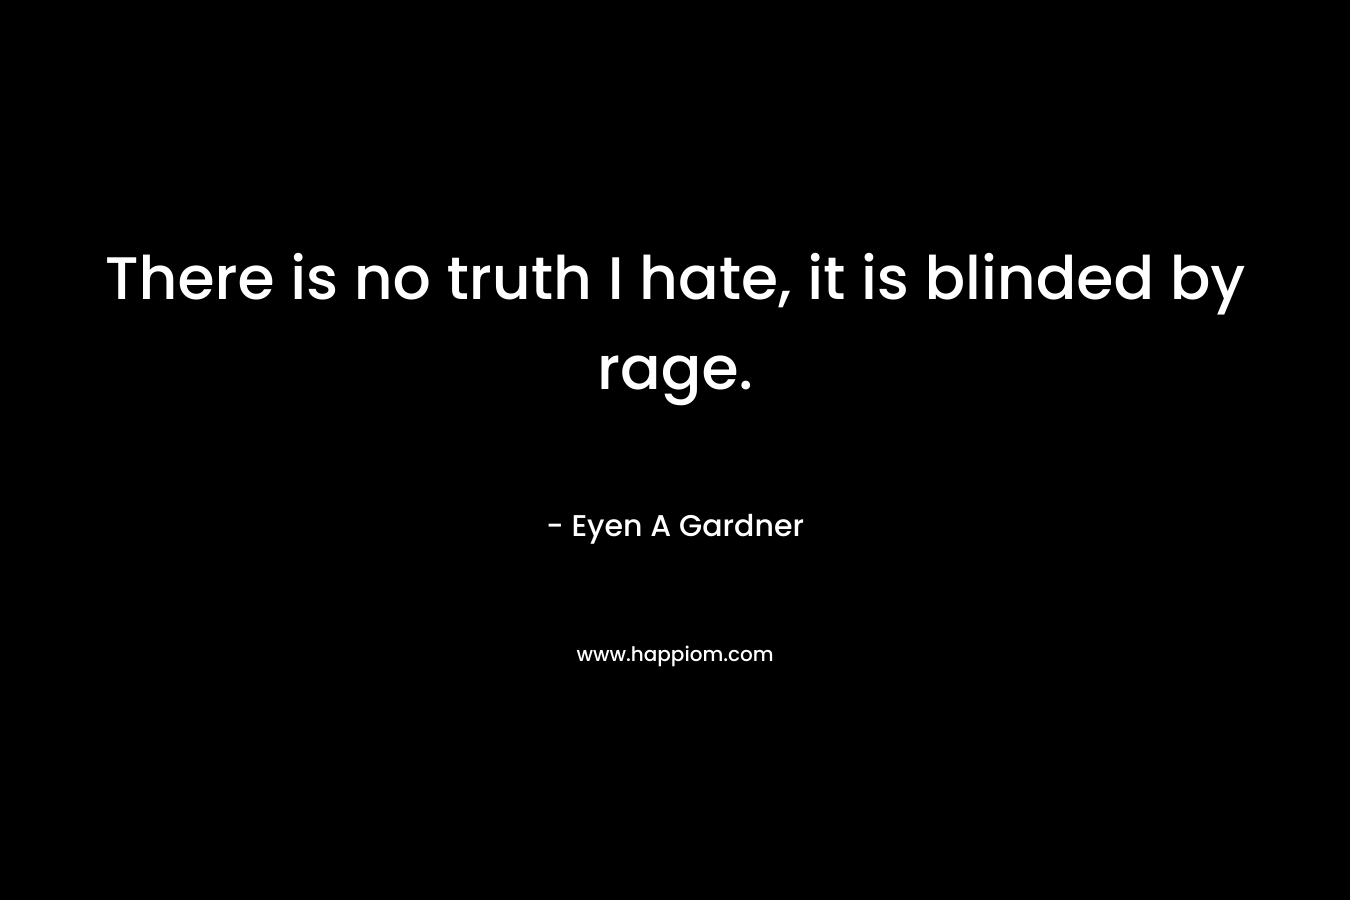 There is no truth I hate, it is blinded by rage. – Eyen A Gardner